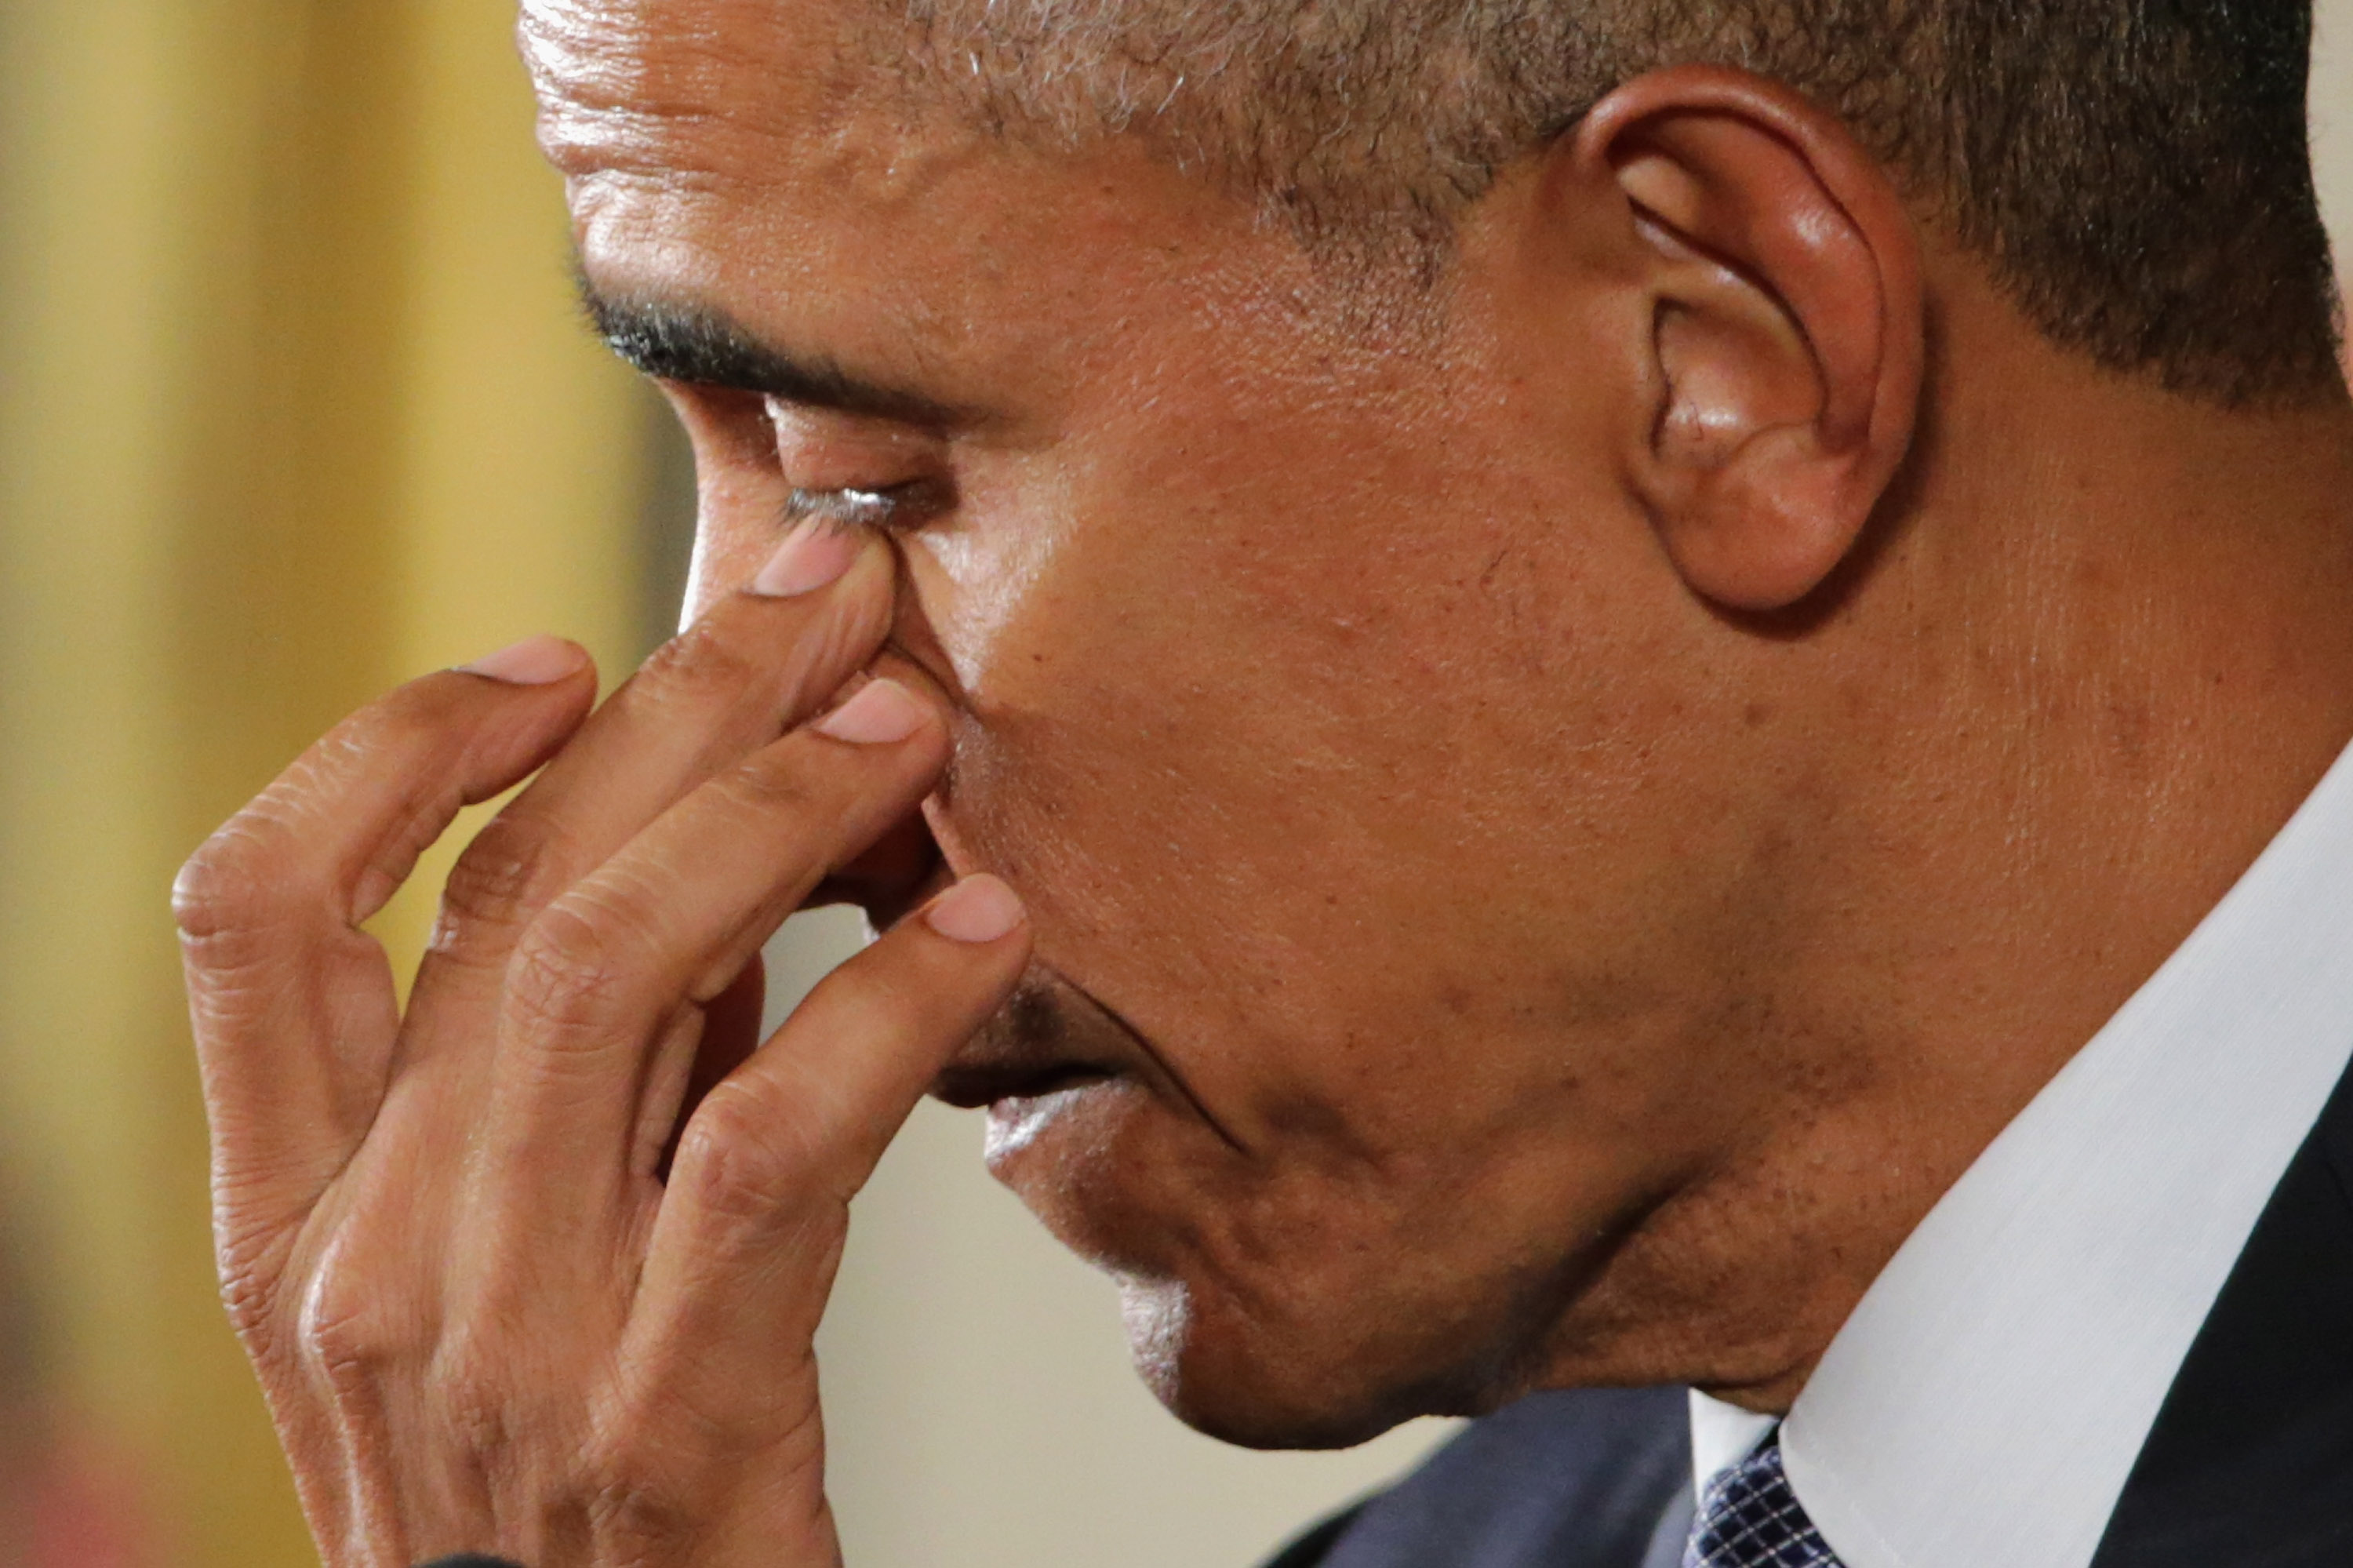 U.S. President Barack Obama wipes away tears as talks about the victims of the 2012 Sandy Hook Elementary School shooting and about his efforts to increase federal gun control in the East Room of the White House in Washington, D.C., on Jan. 5, 2016